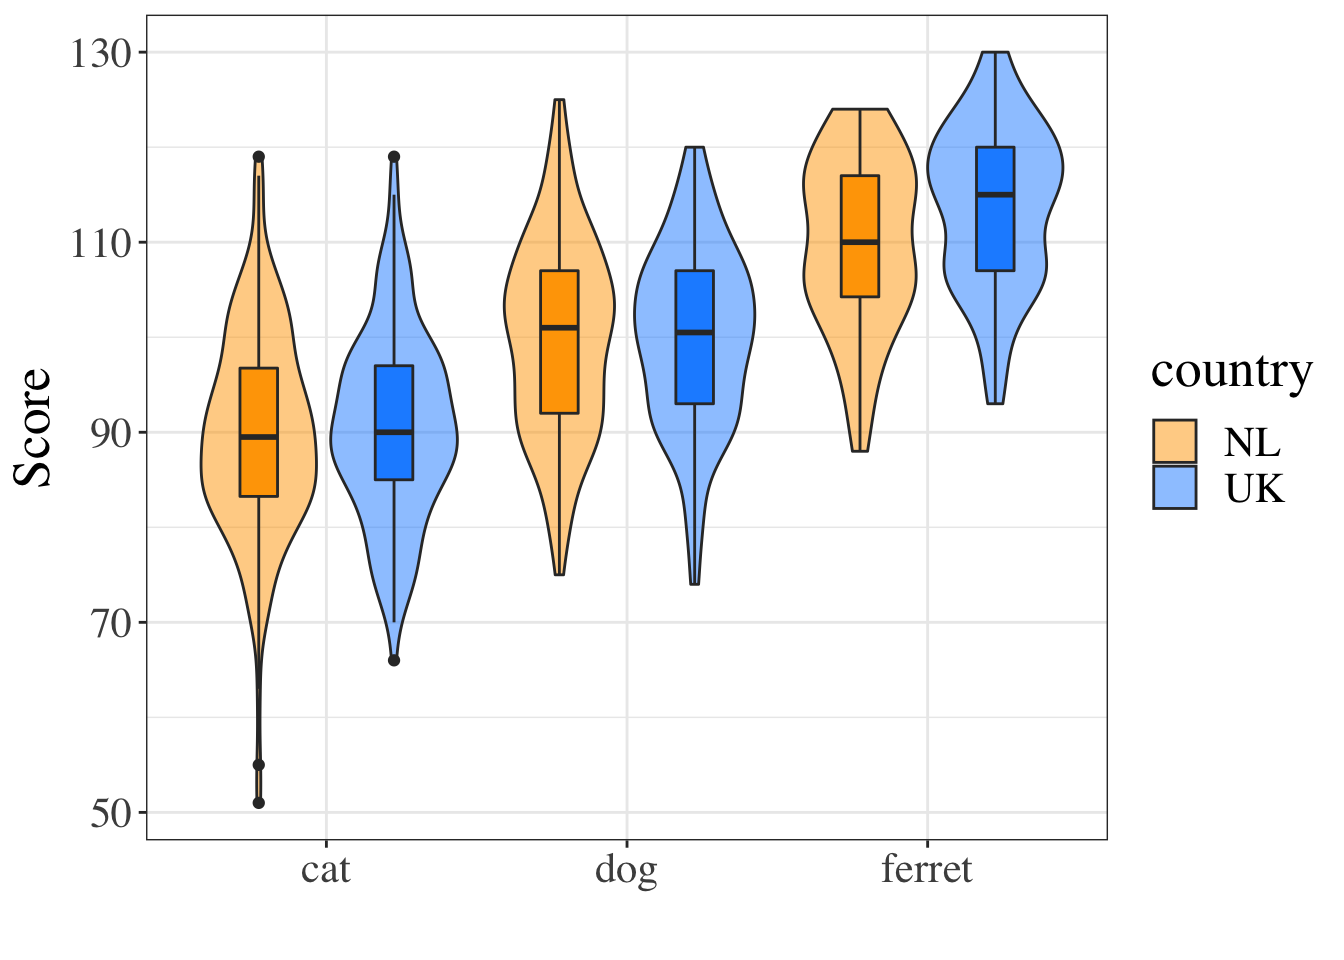 Figure 1. Scores by pet type and country.